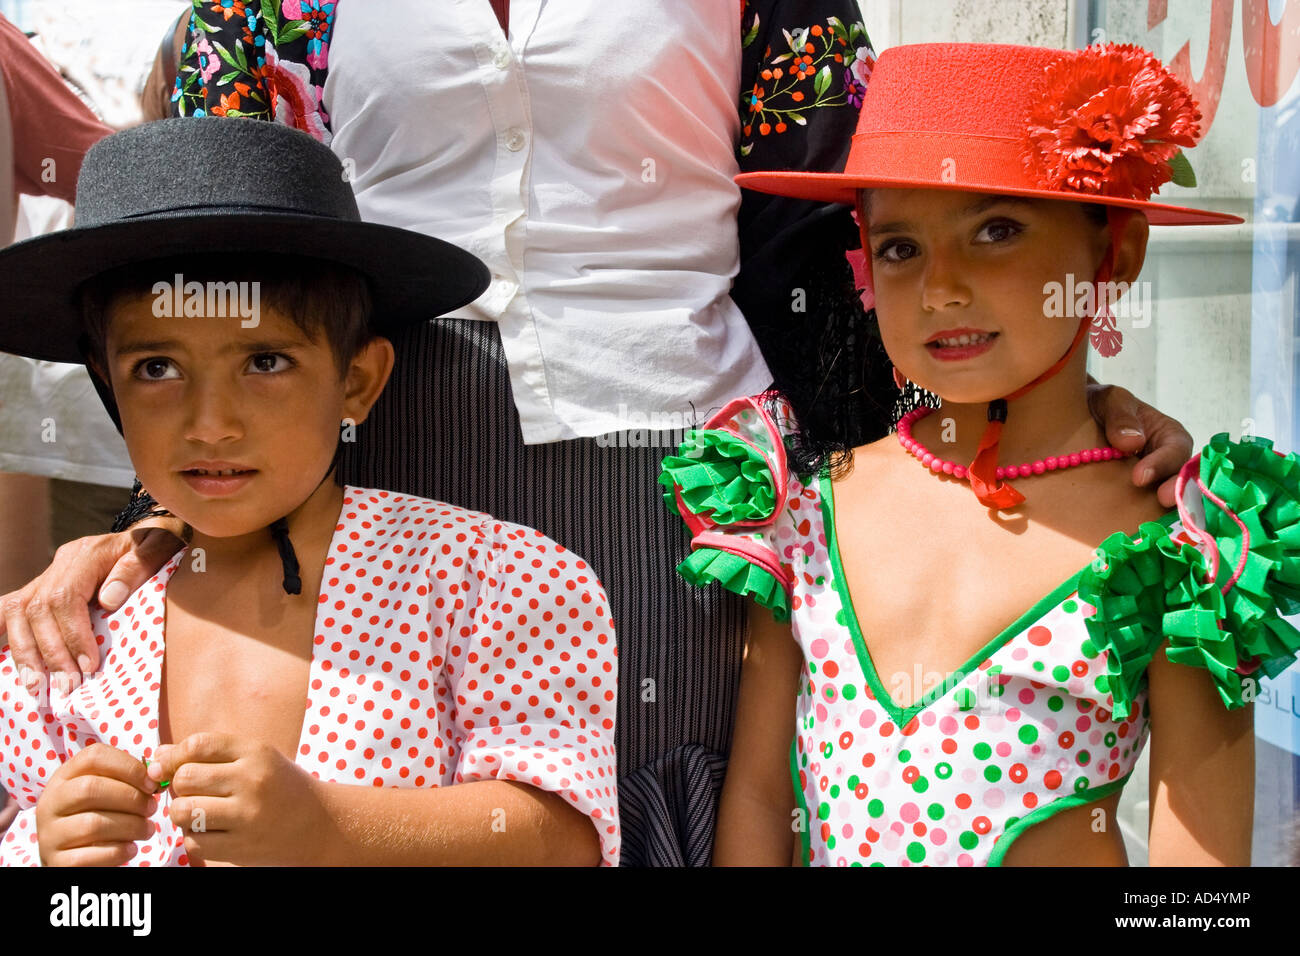 Brother and sister, with mother behind, in traditional costume for the annual feria, or fair, in Malaga city, Andalusia, Spain. Stock Photo